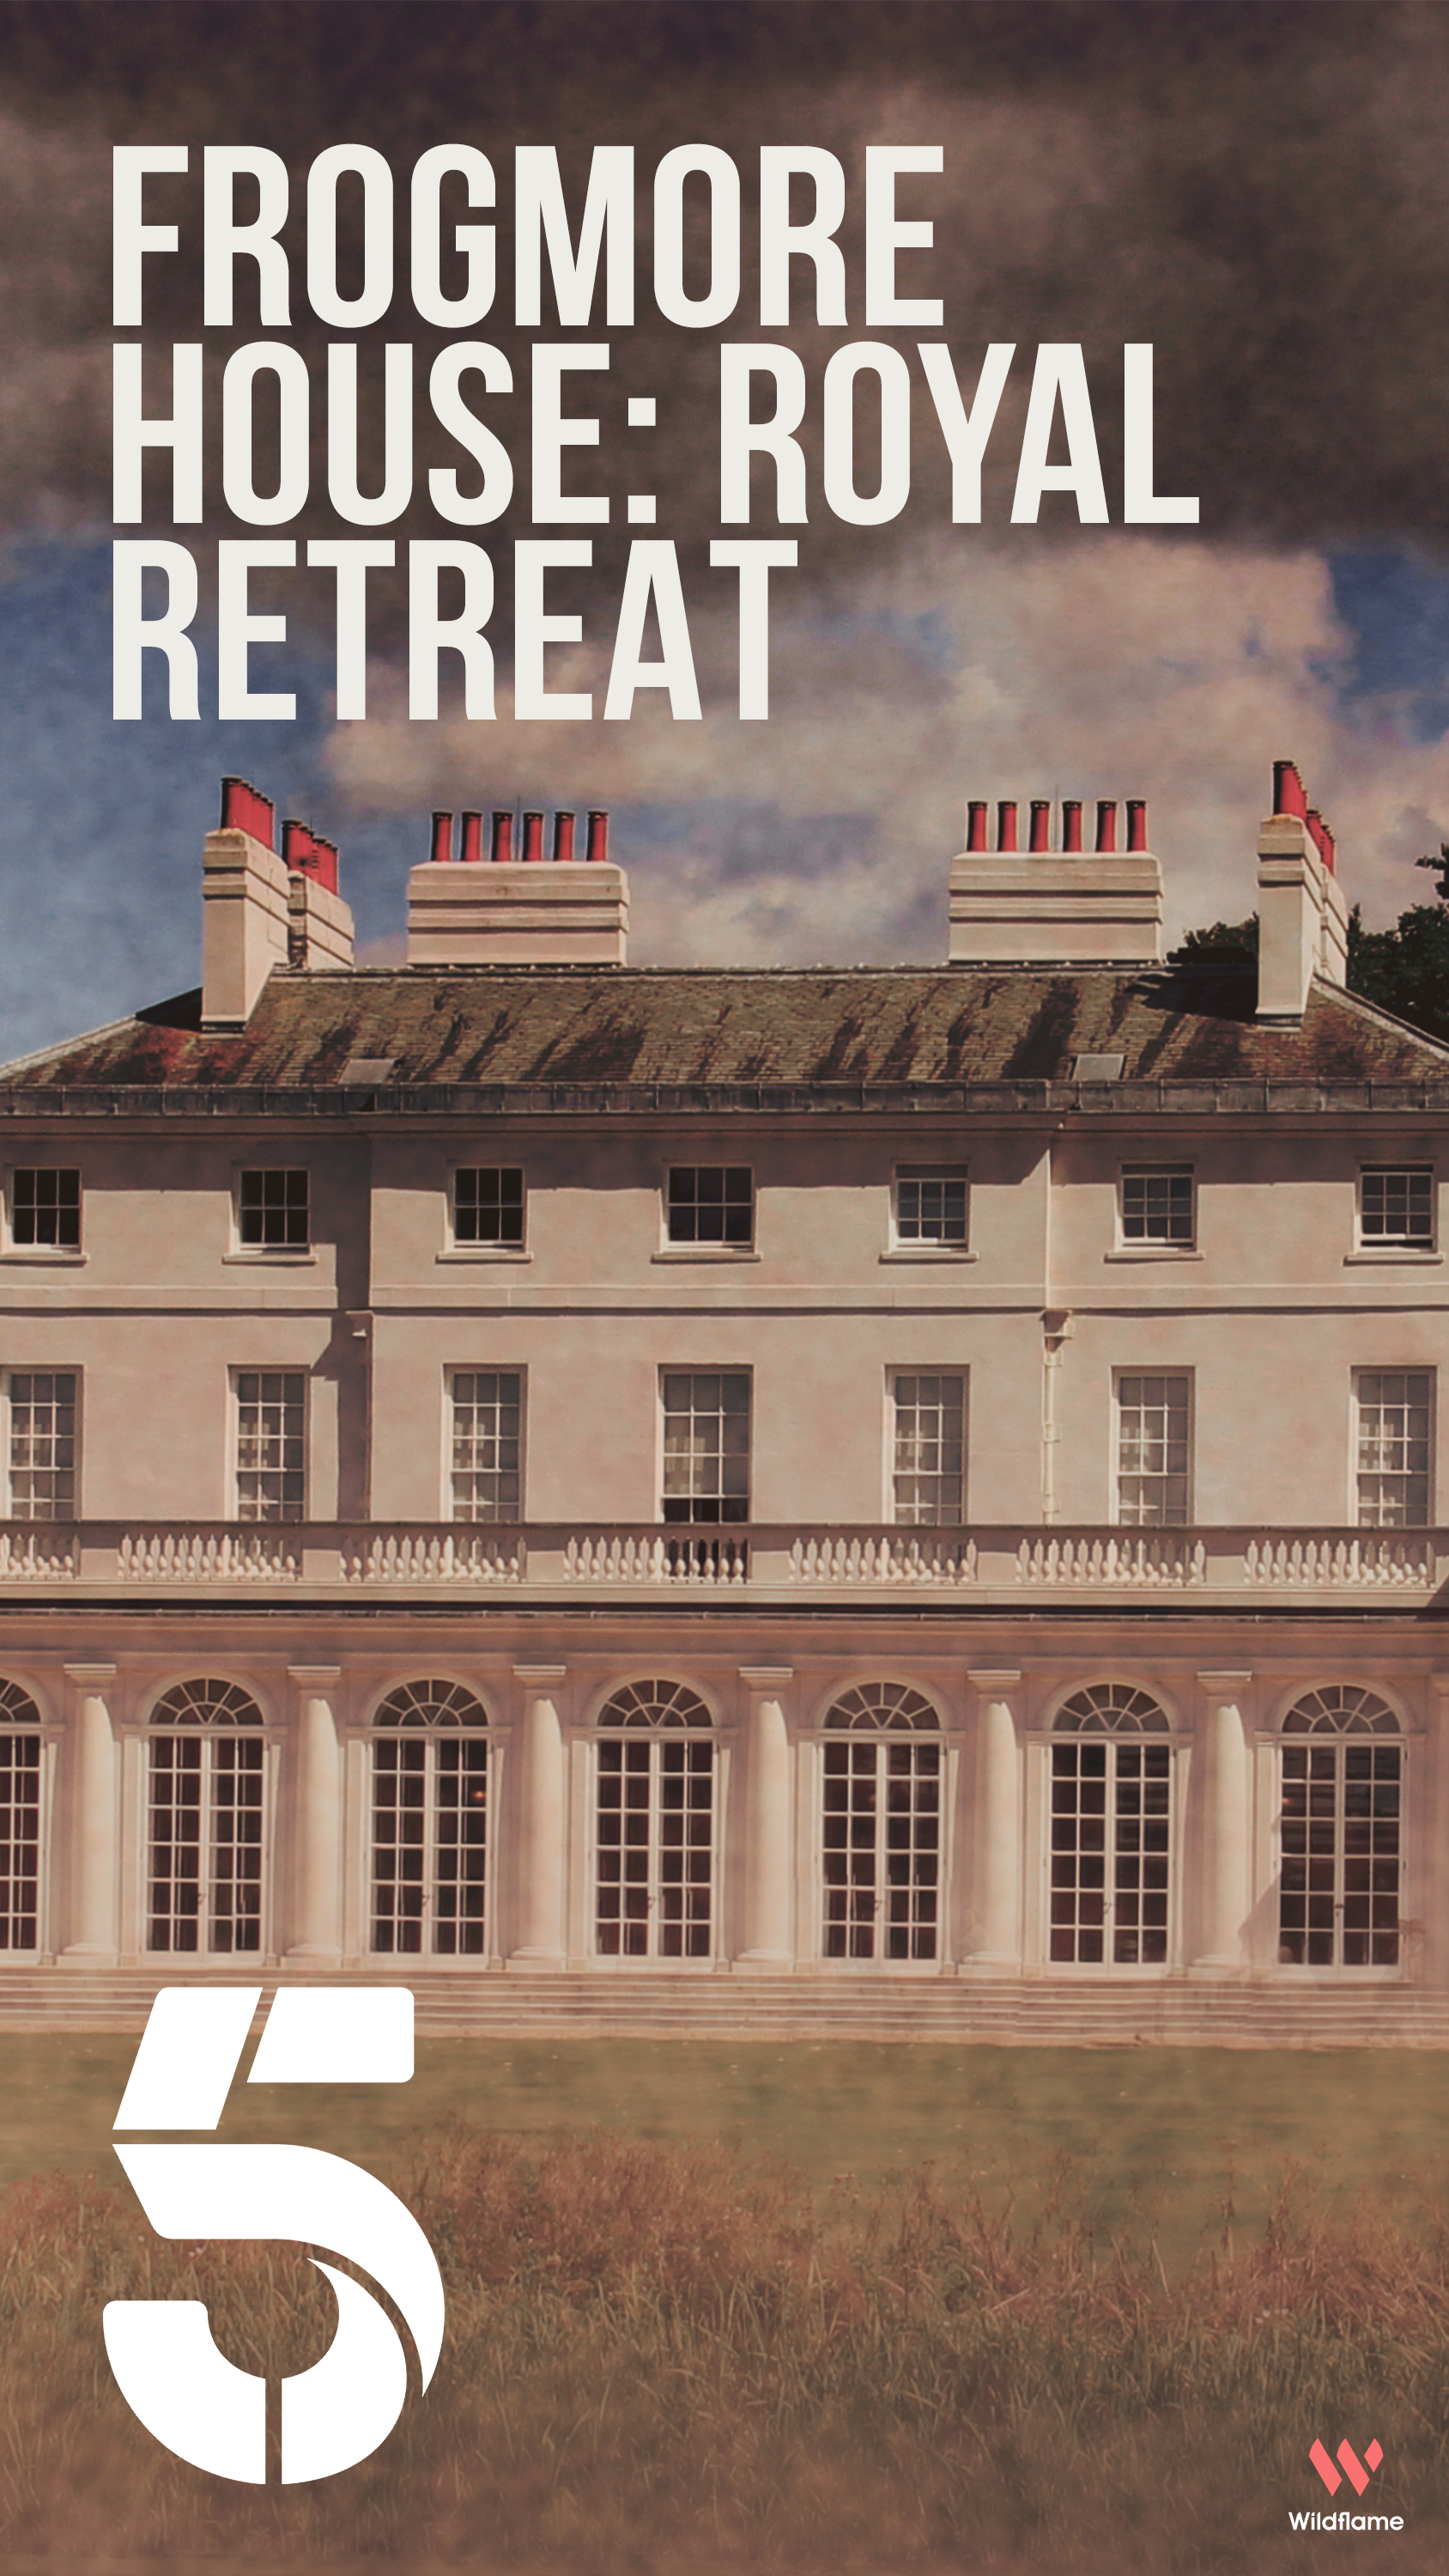 Frogmore House: Royal Retreat